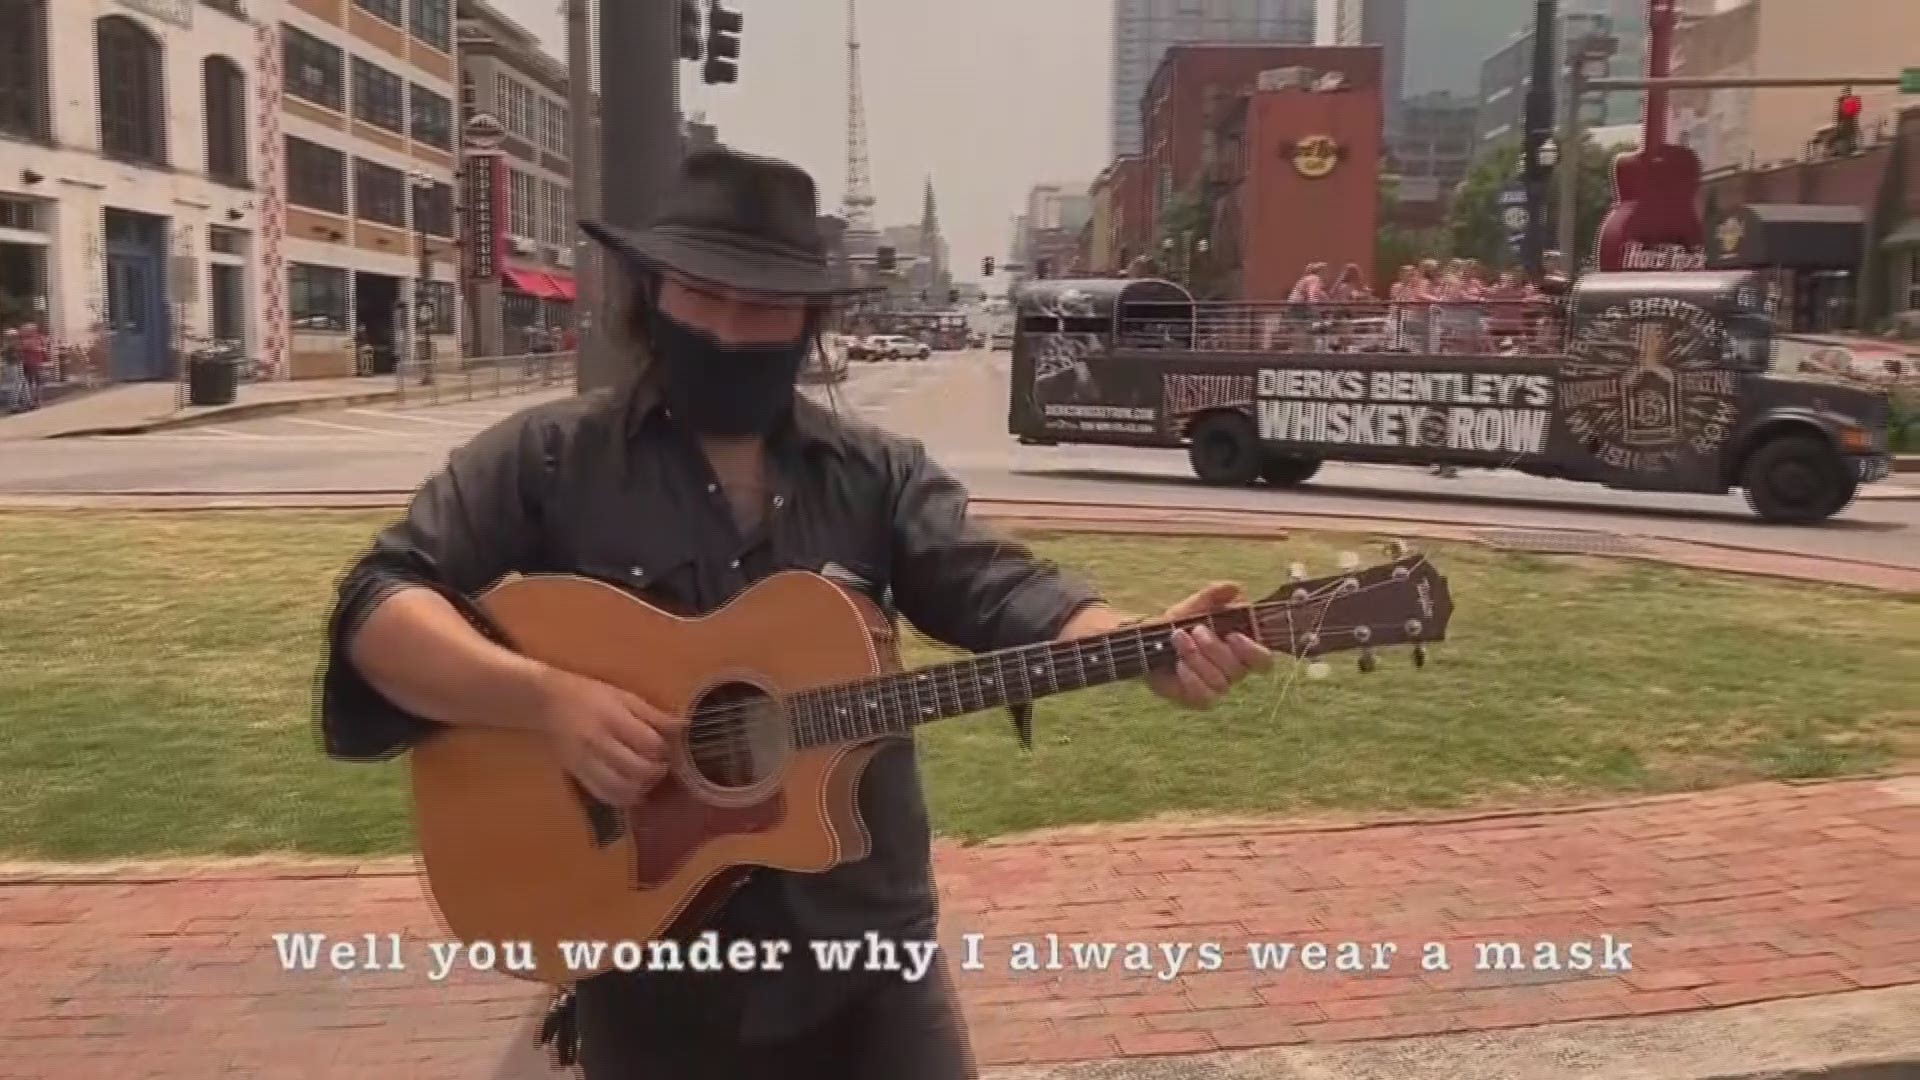 Mainer Adam Kurtz channeled his inner Johnny Cash to become the 'Man in Mask' in Nashville making headlines in Rolling Stone.